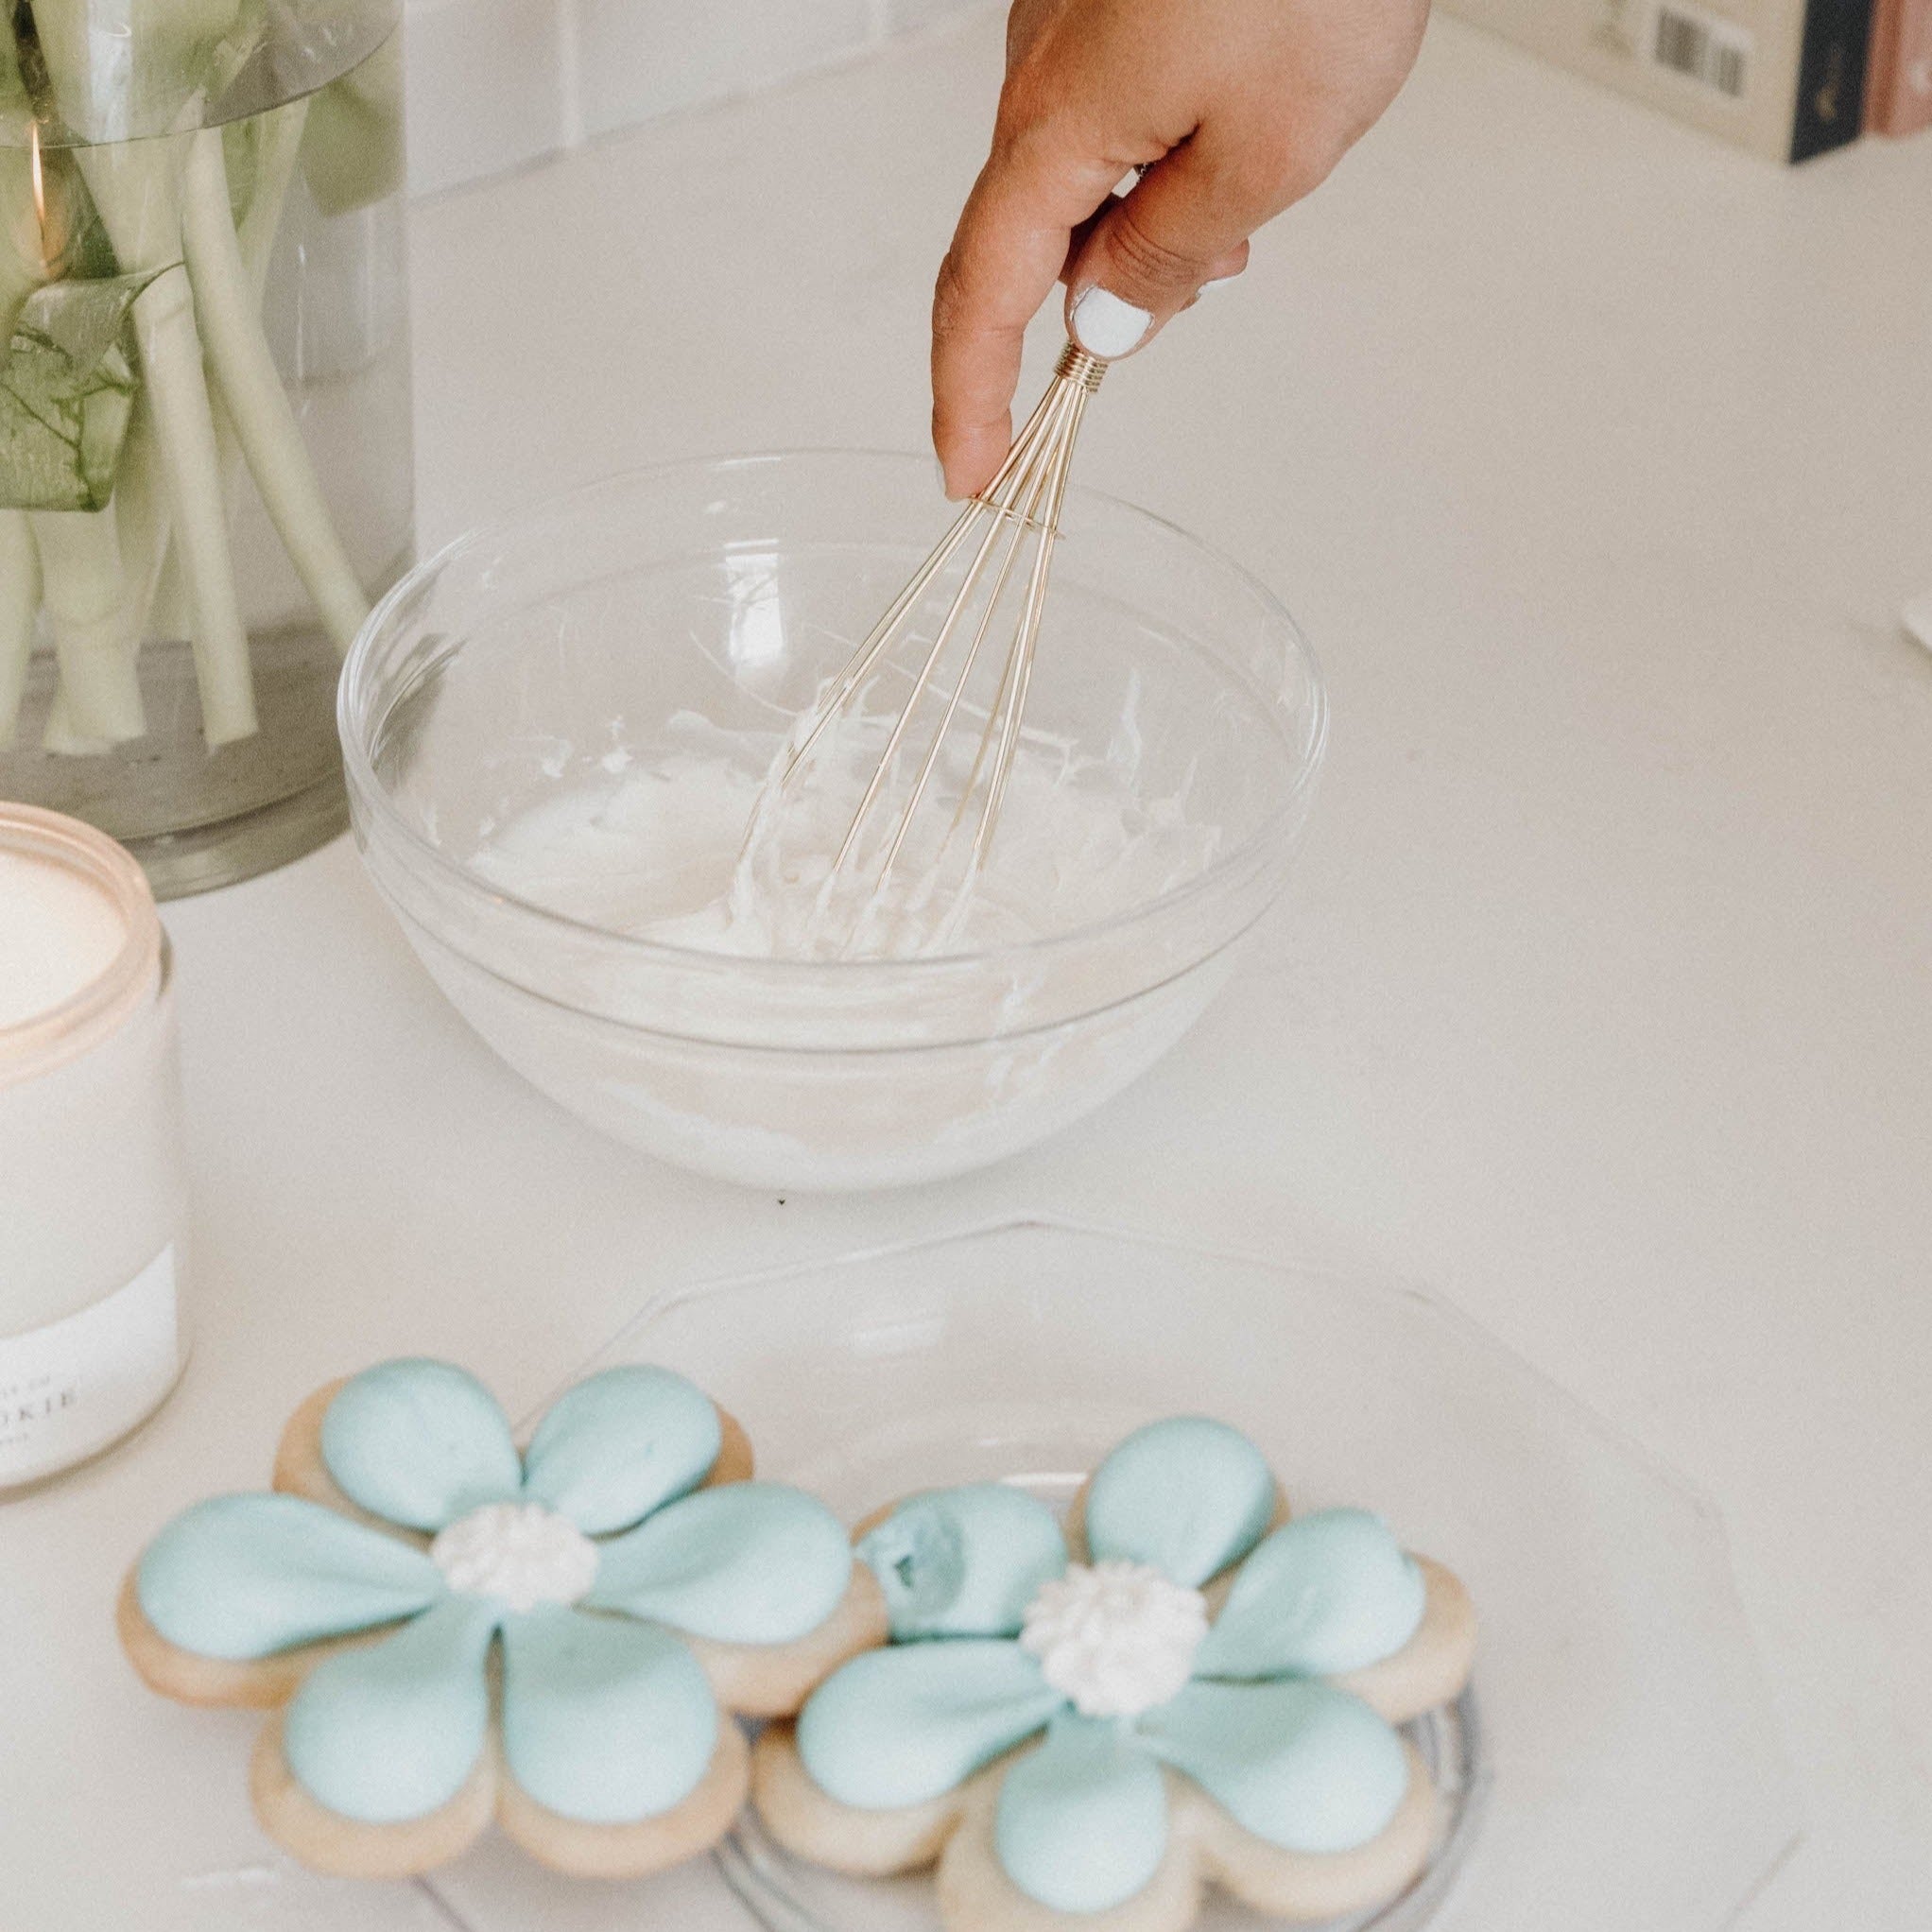 Gold whisk mixing frosting in bowl next to plate of blue flower sugar cookies.